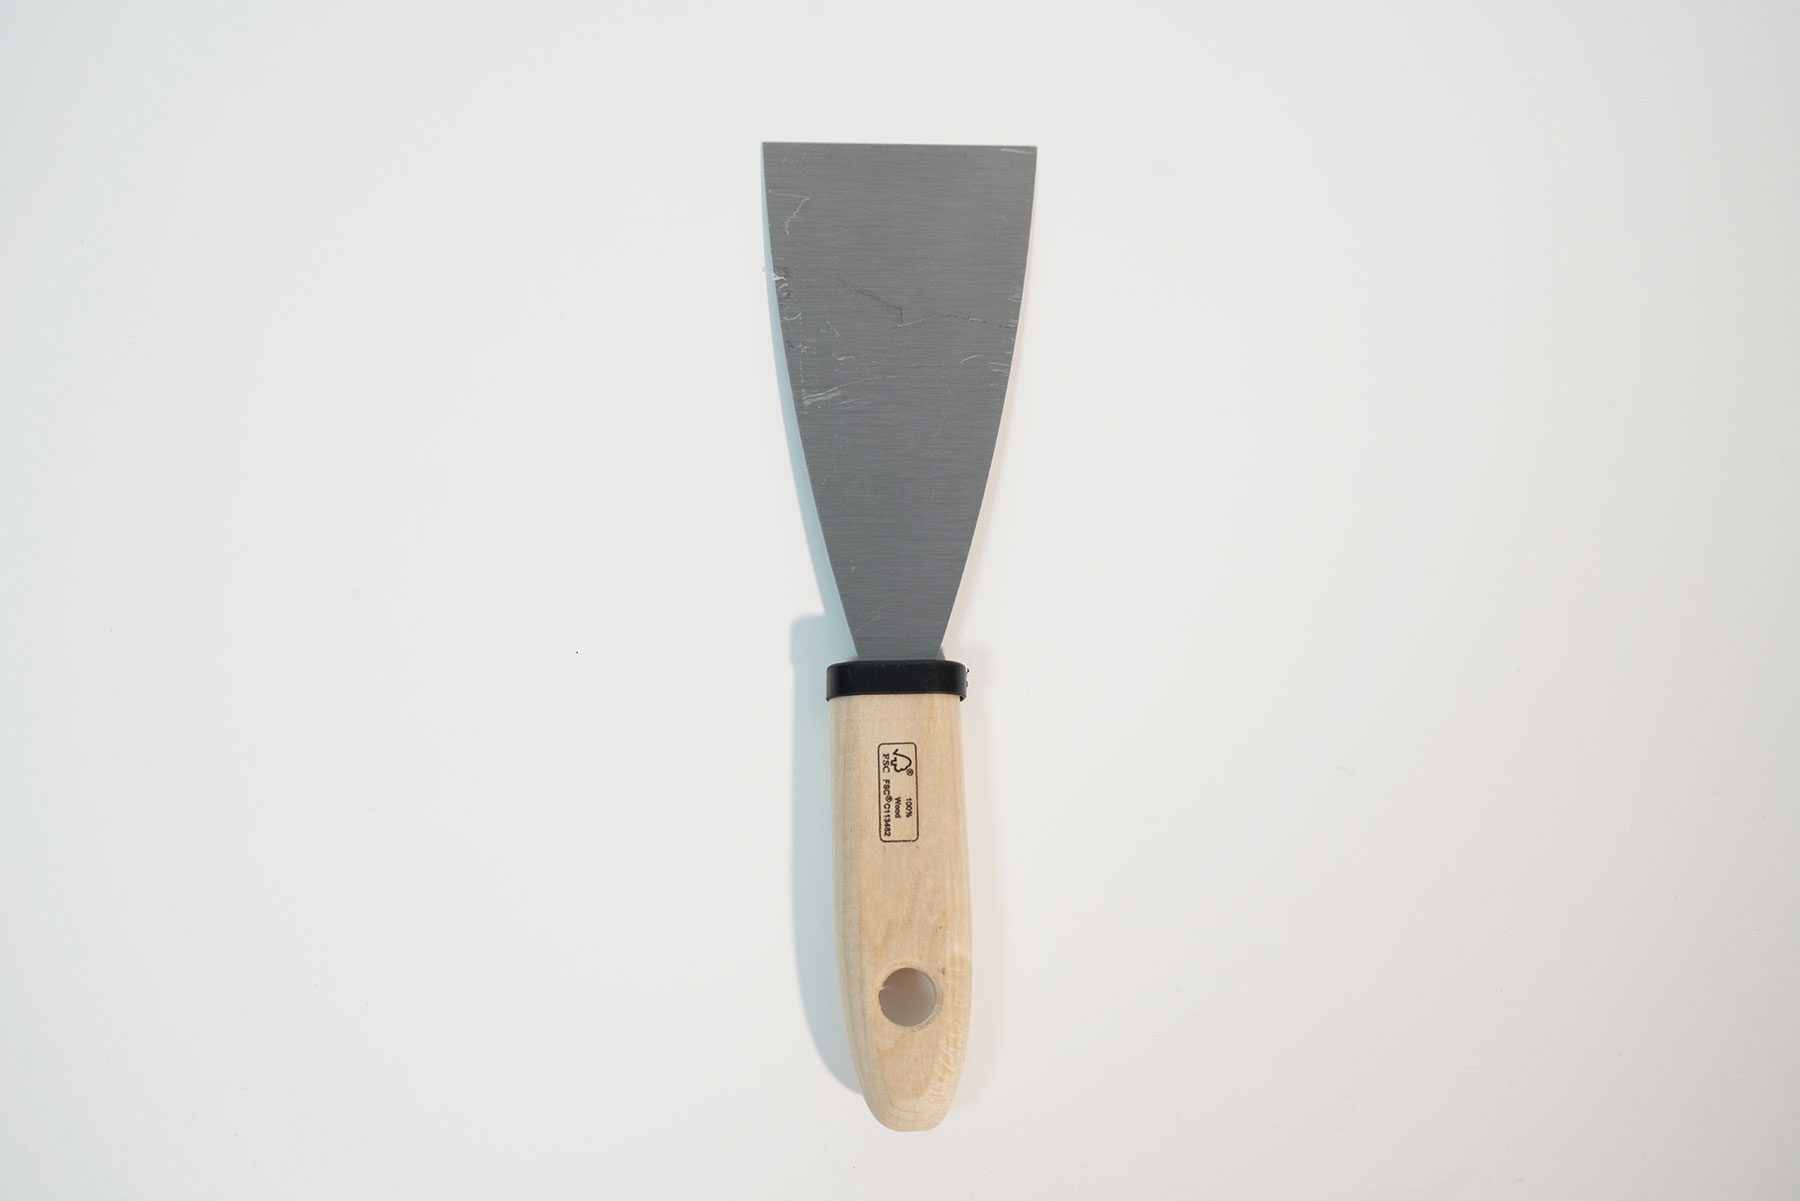             Painter spatula 60mm with flexible steel blade & wooden handle
        